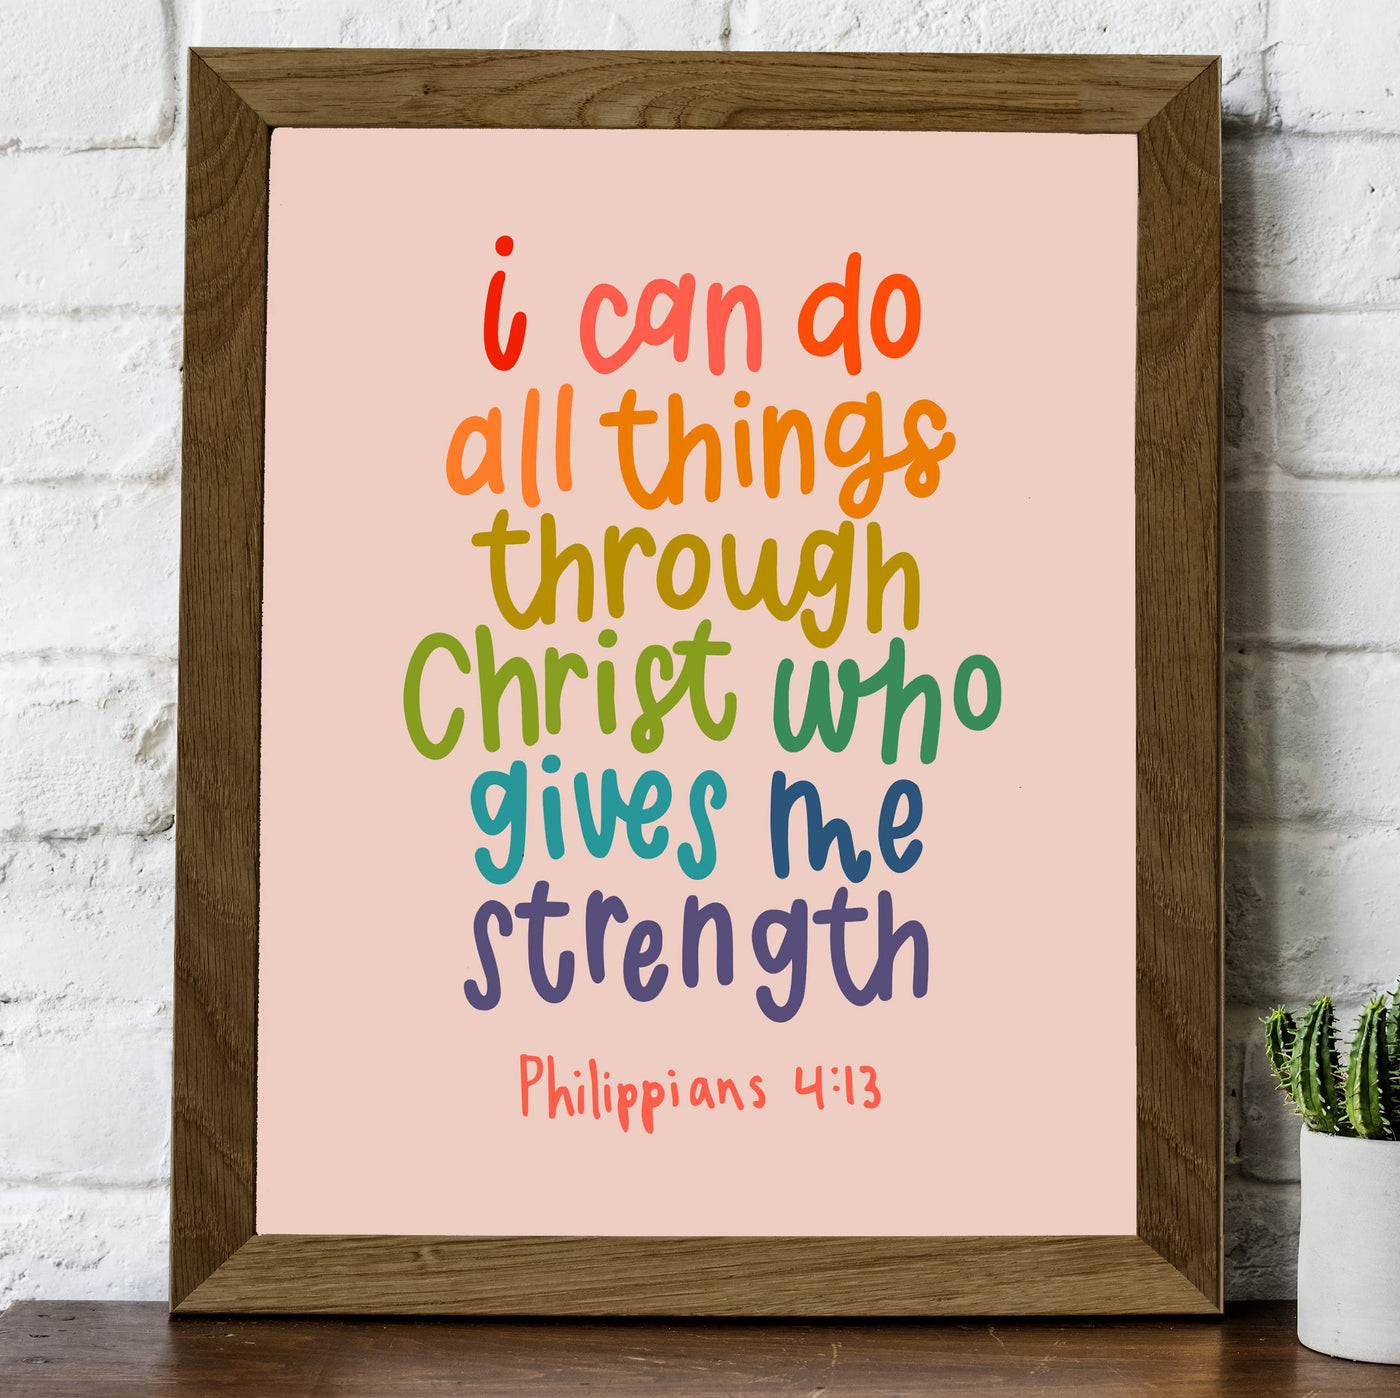 I Can Do All Things Through Christ Who Gives Me Strength-Bible Verse Wall Art -8 x 10" Scripture Poster Print -Ready to Frame. Home-Office-Church-School Decor & Christian Gifts! Philippians 4:13.